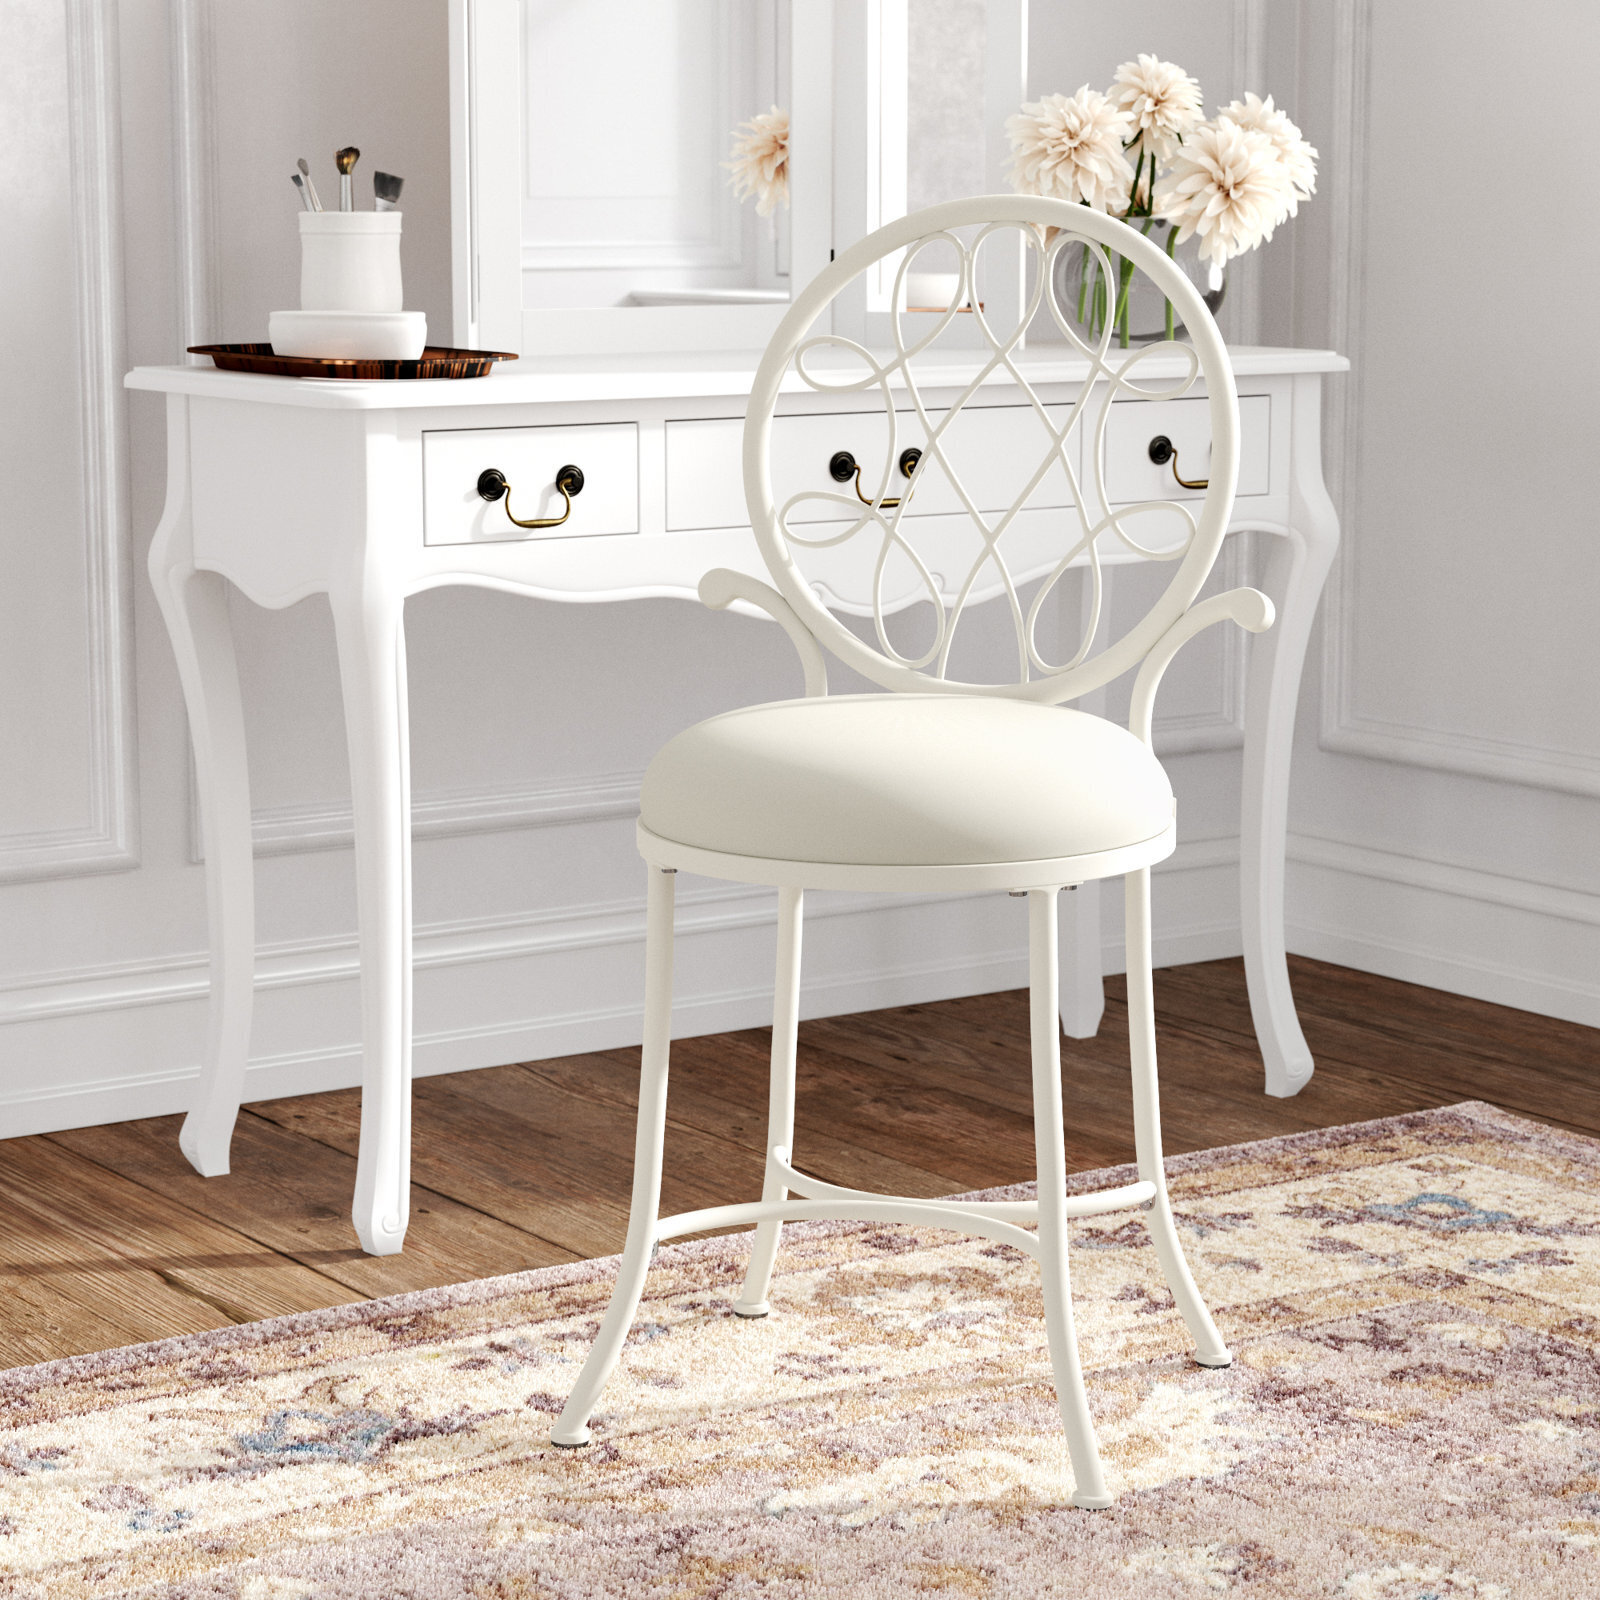 Tall Patterned Vanity Chair With Back